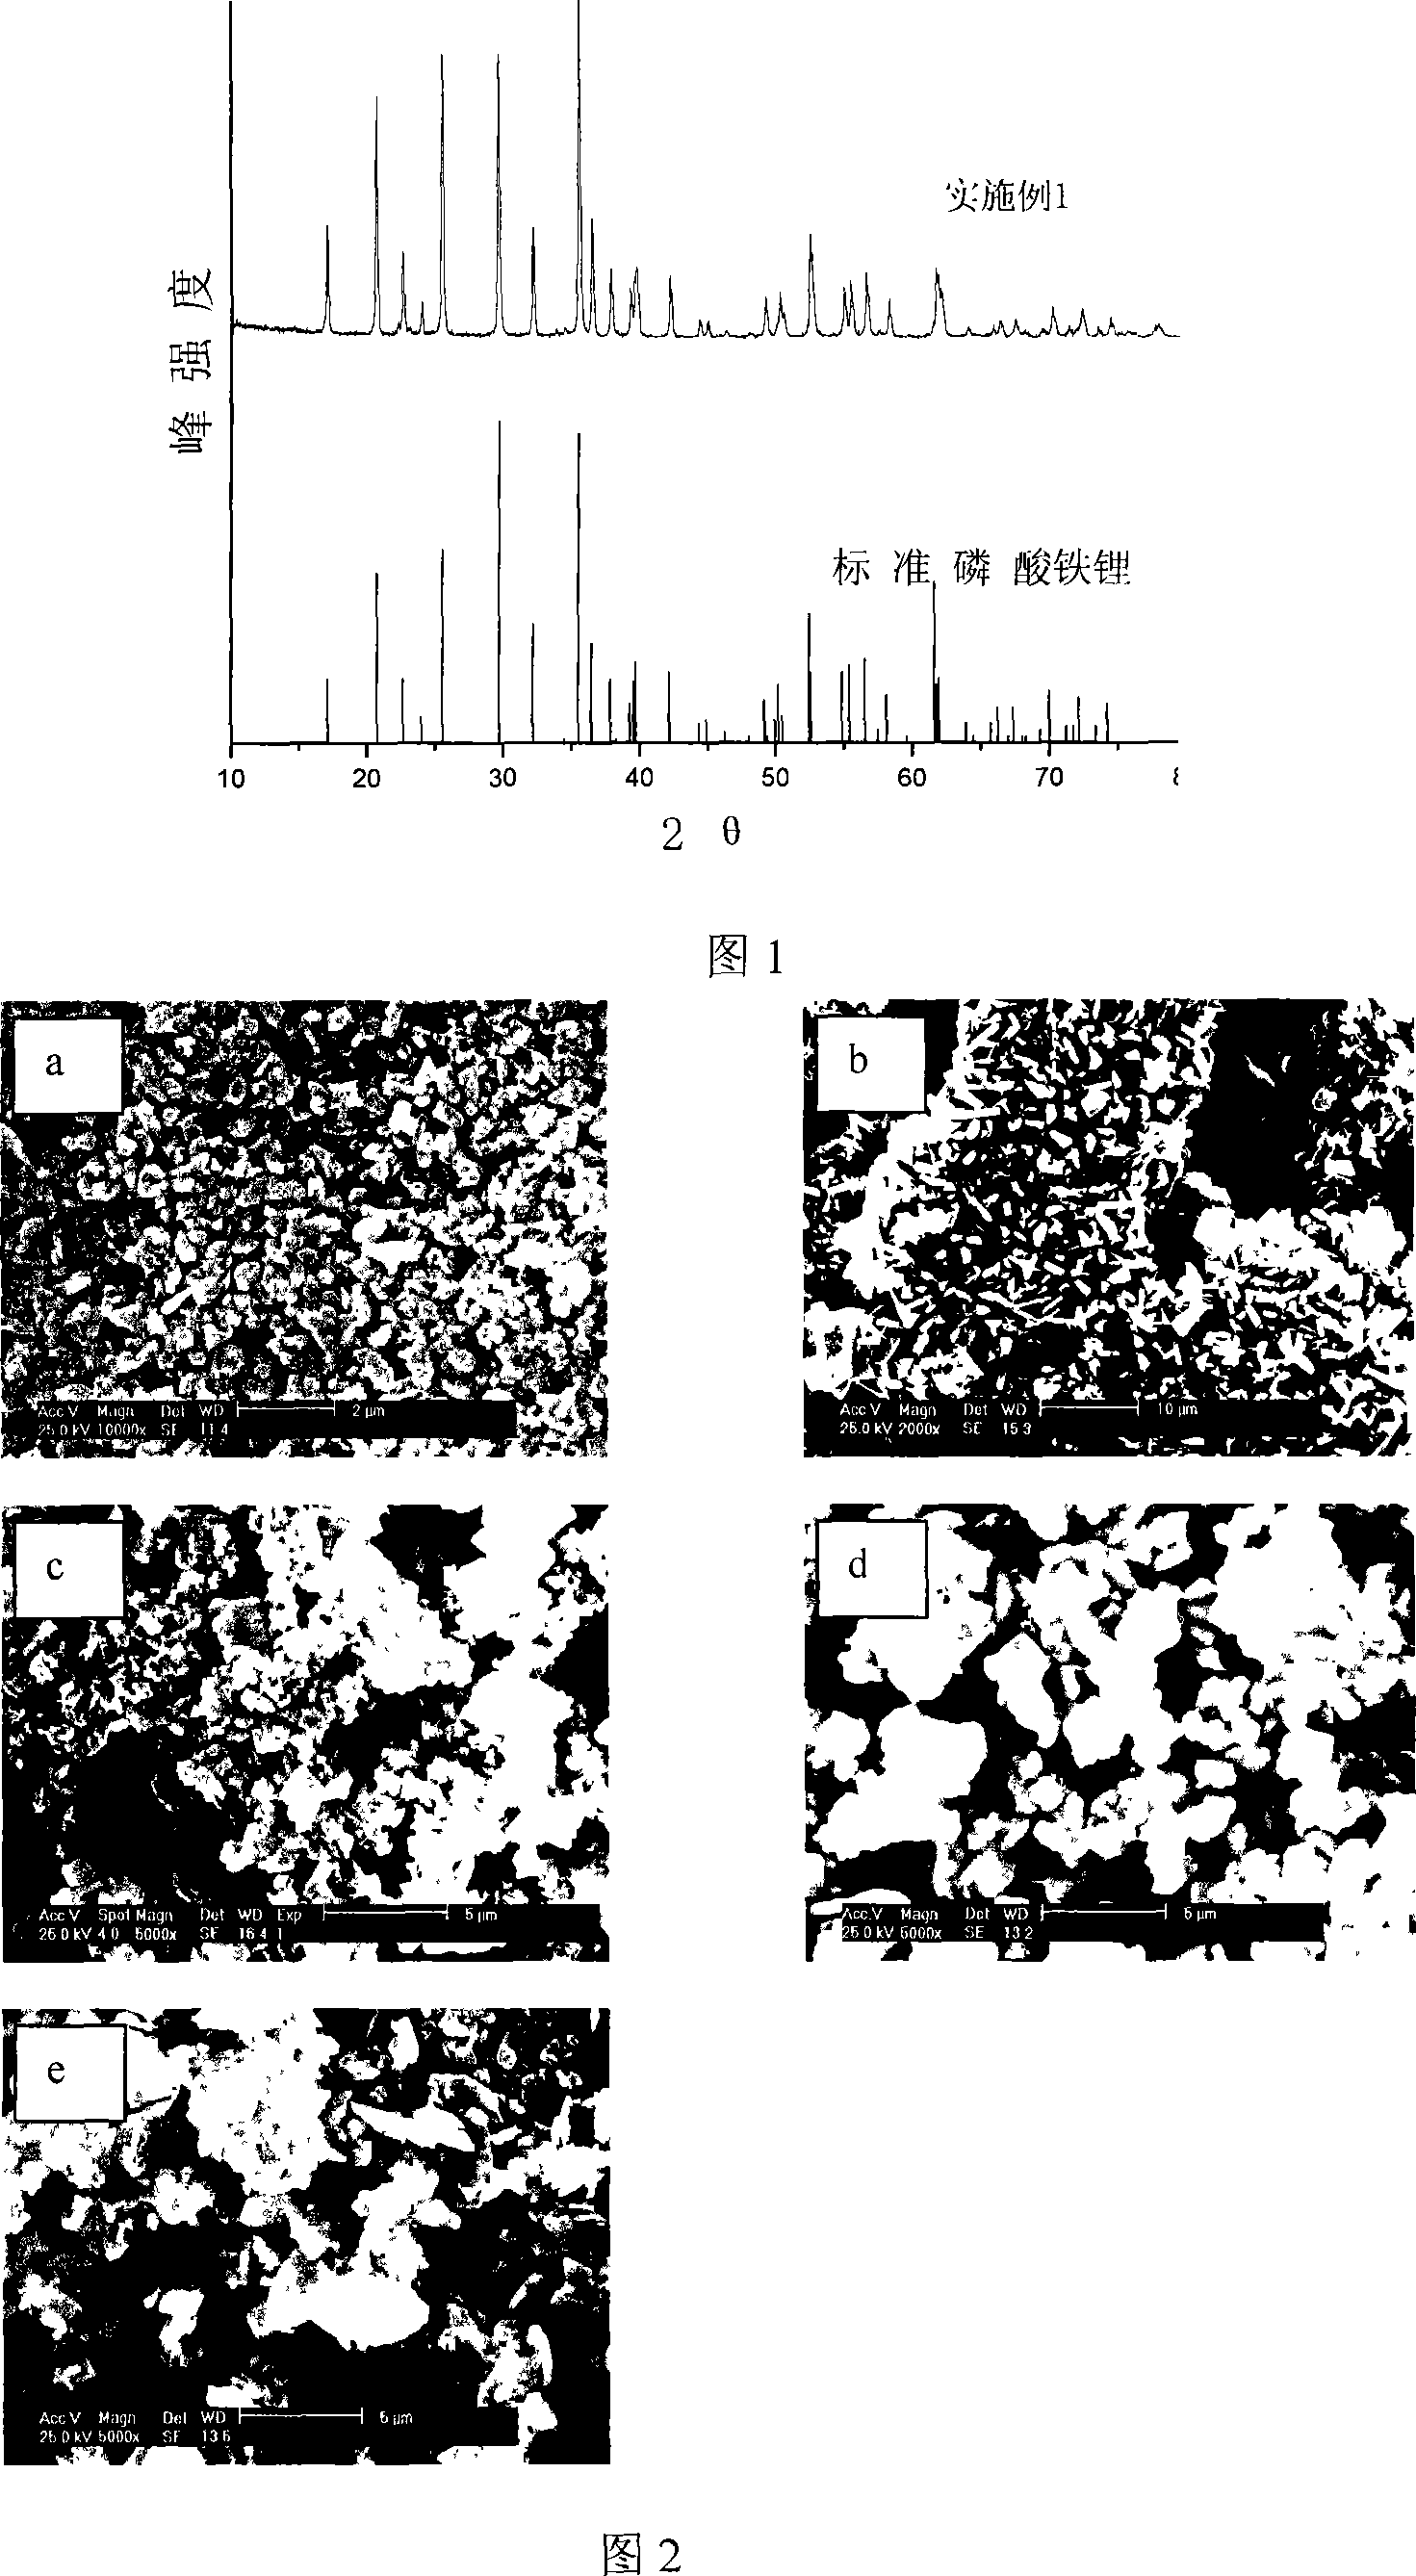 Hydrothermal synthesis method for lithium ion-cell anode material of ferric phosphate lithium